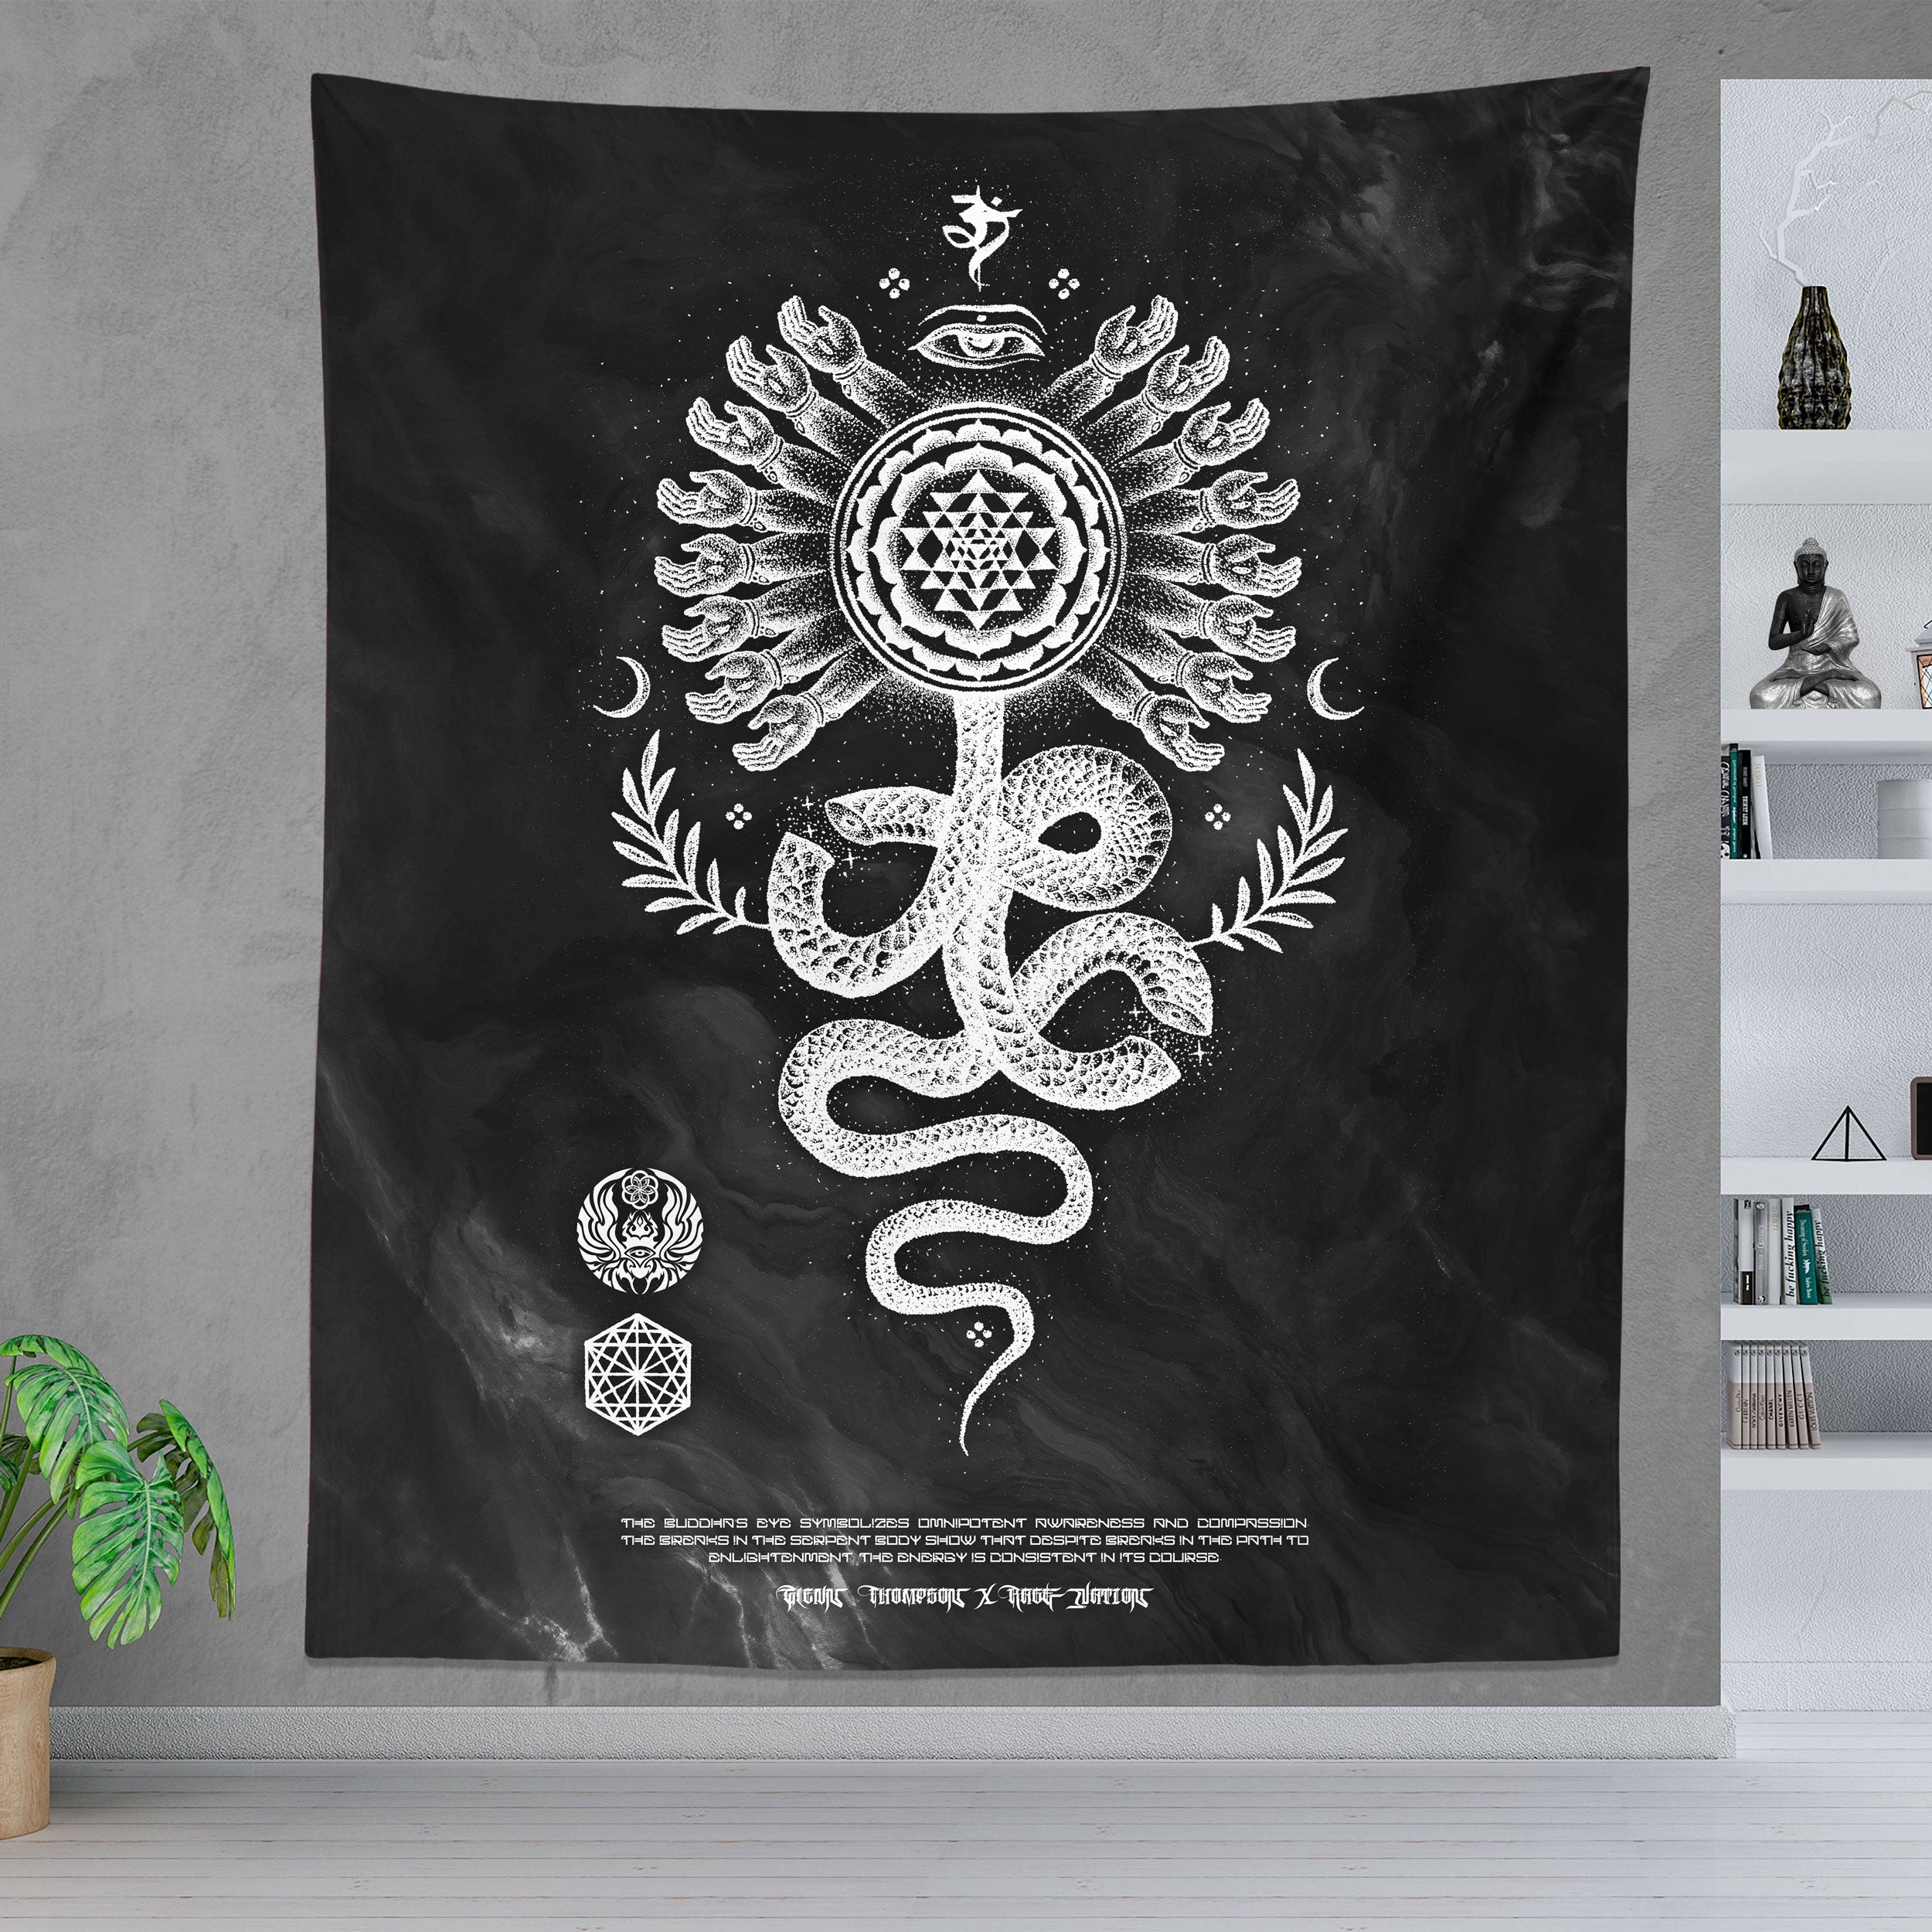 SERPENT INVOCATION • GLENN THOMSON • Limited Edition Wall Tapestry Tapestry 